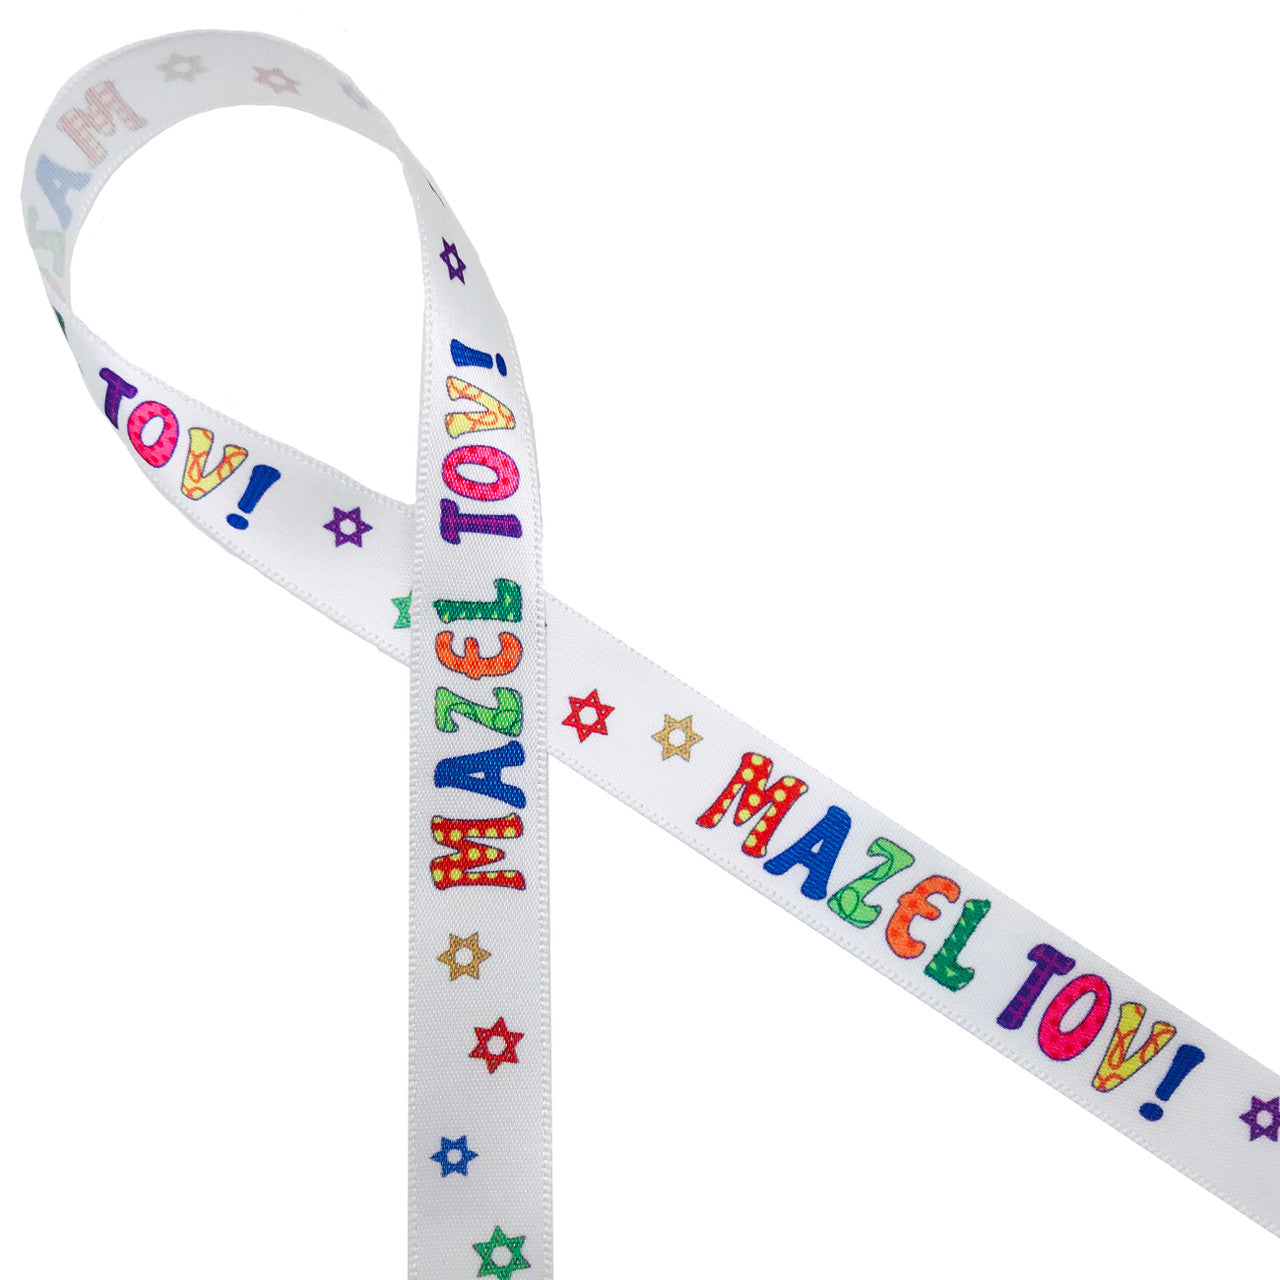 Whimsical Mazel Tov! with bubble letters in primary colors and fun patterns on  5/8" white single face satin ribbon